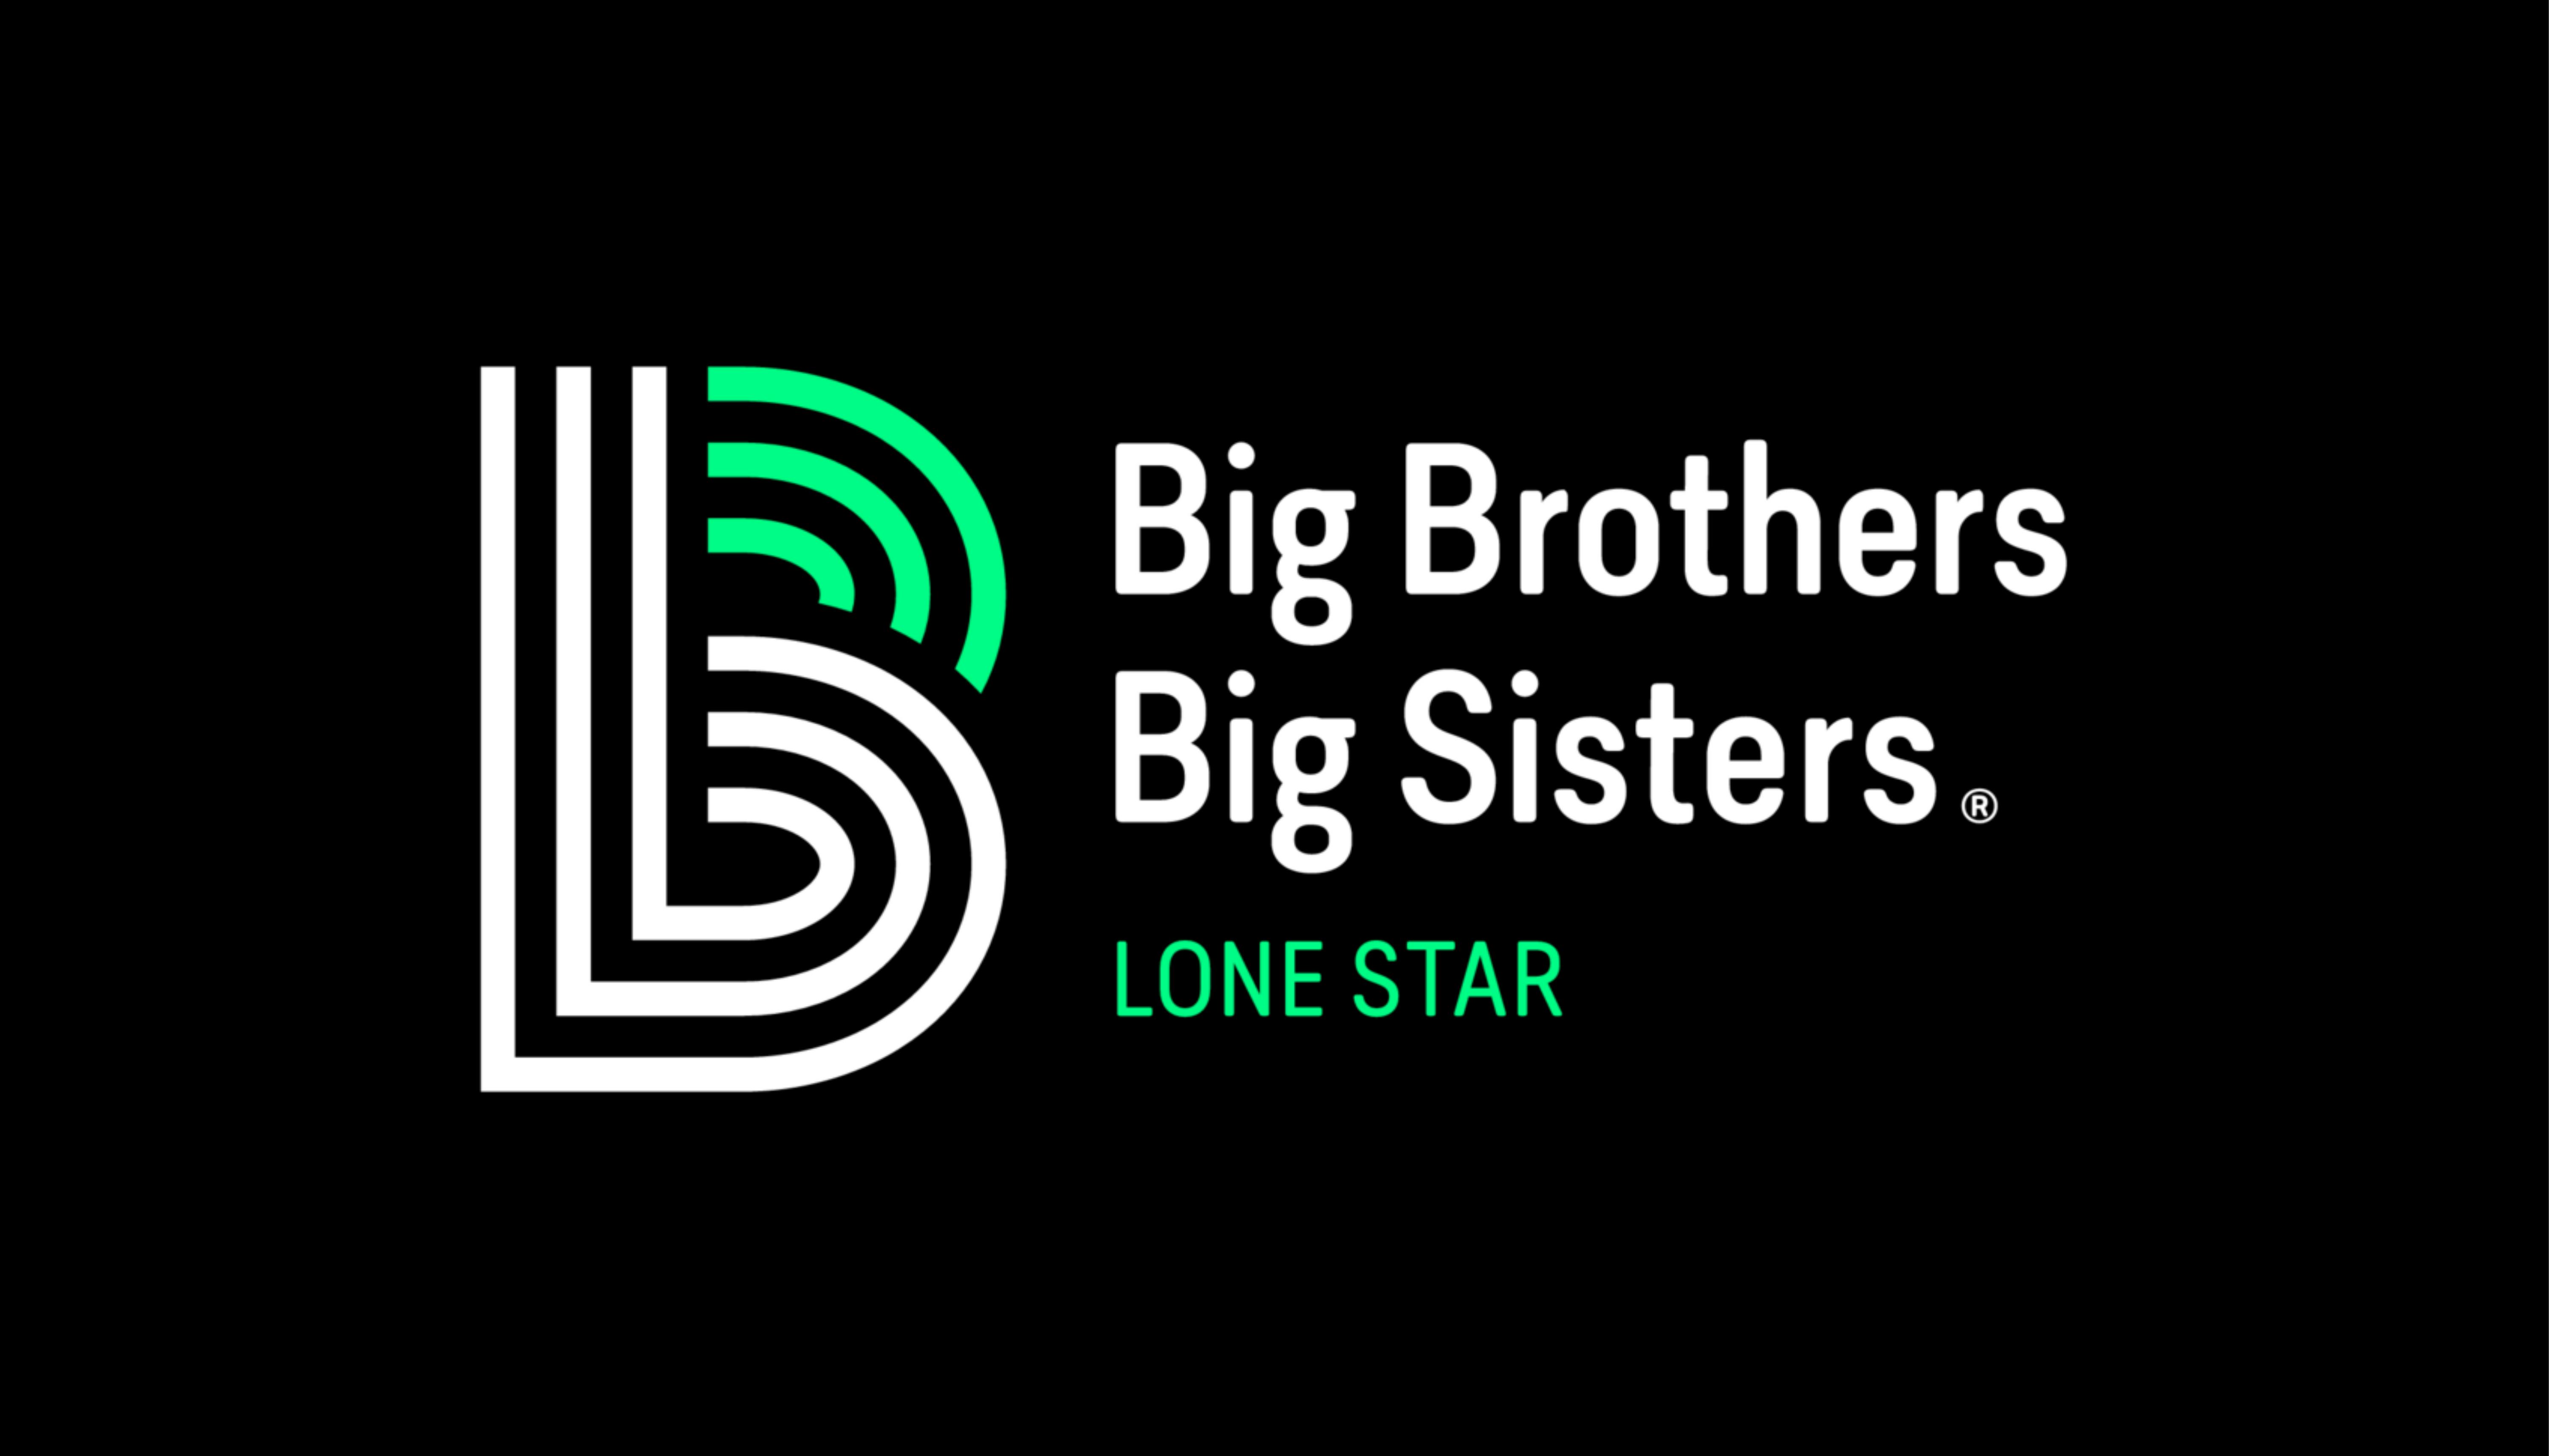 Statement on Behalf of Big Brothers Big Sisters Lone Star from Pierce Bush, CEO cover image